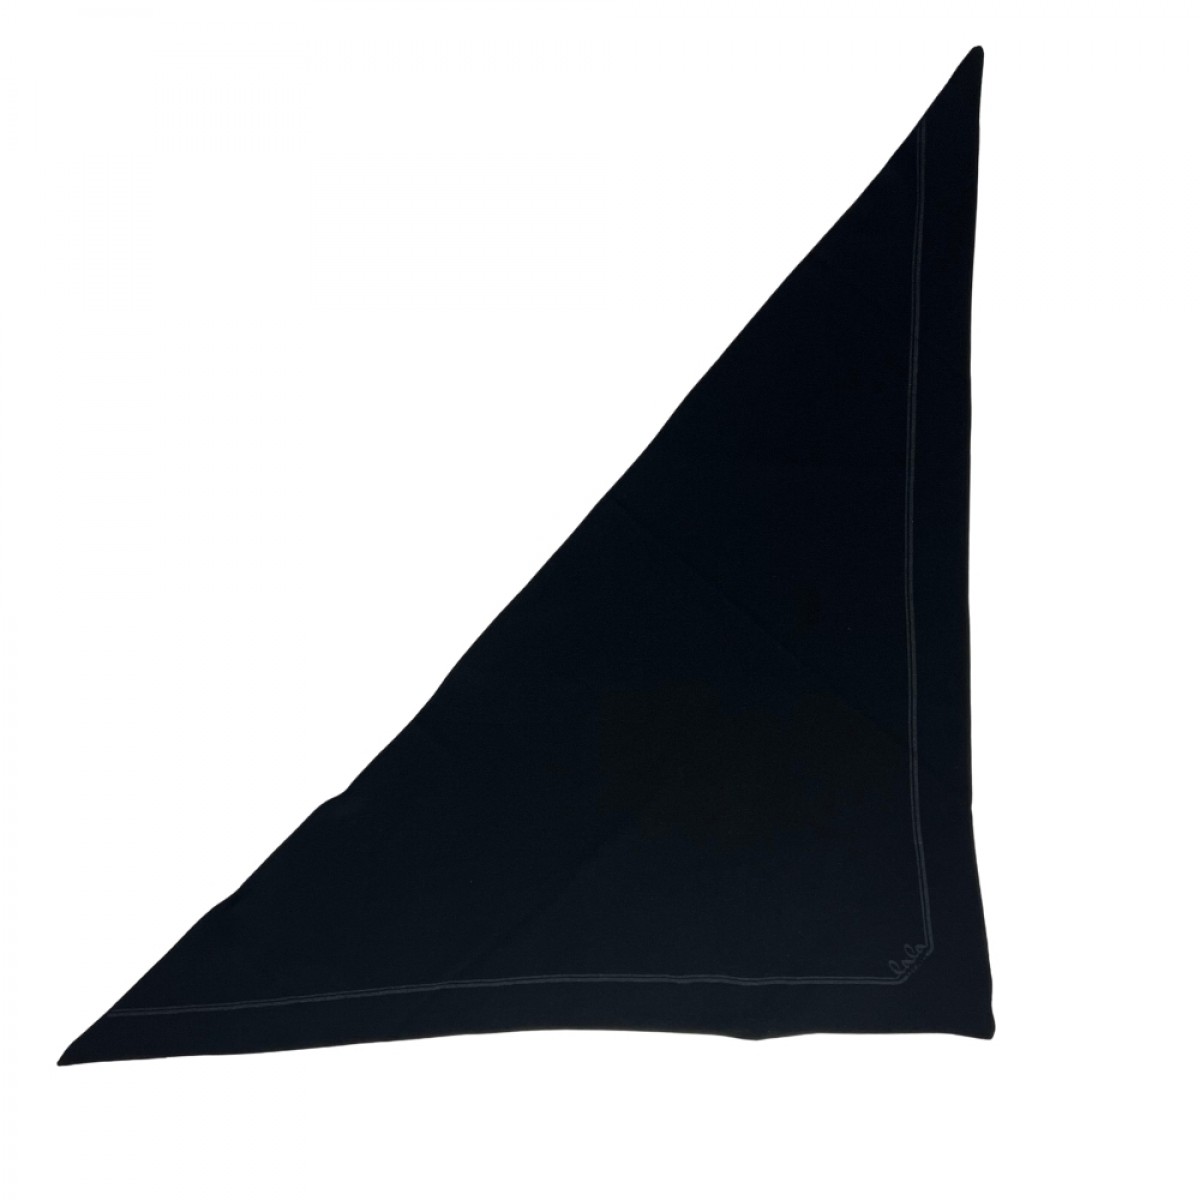 triangle solid logo m - black - front